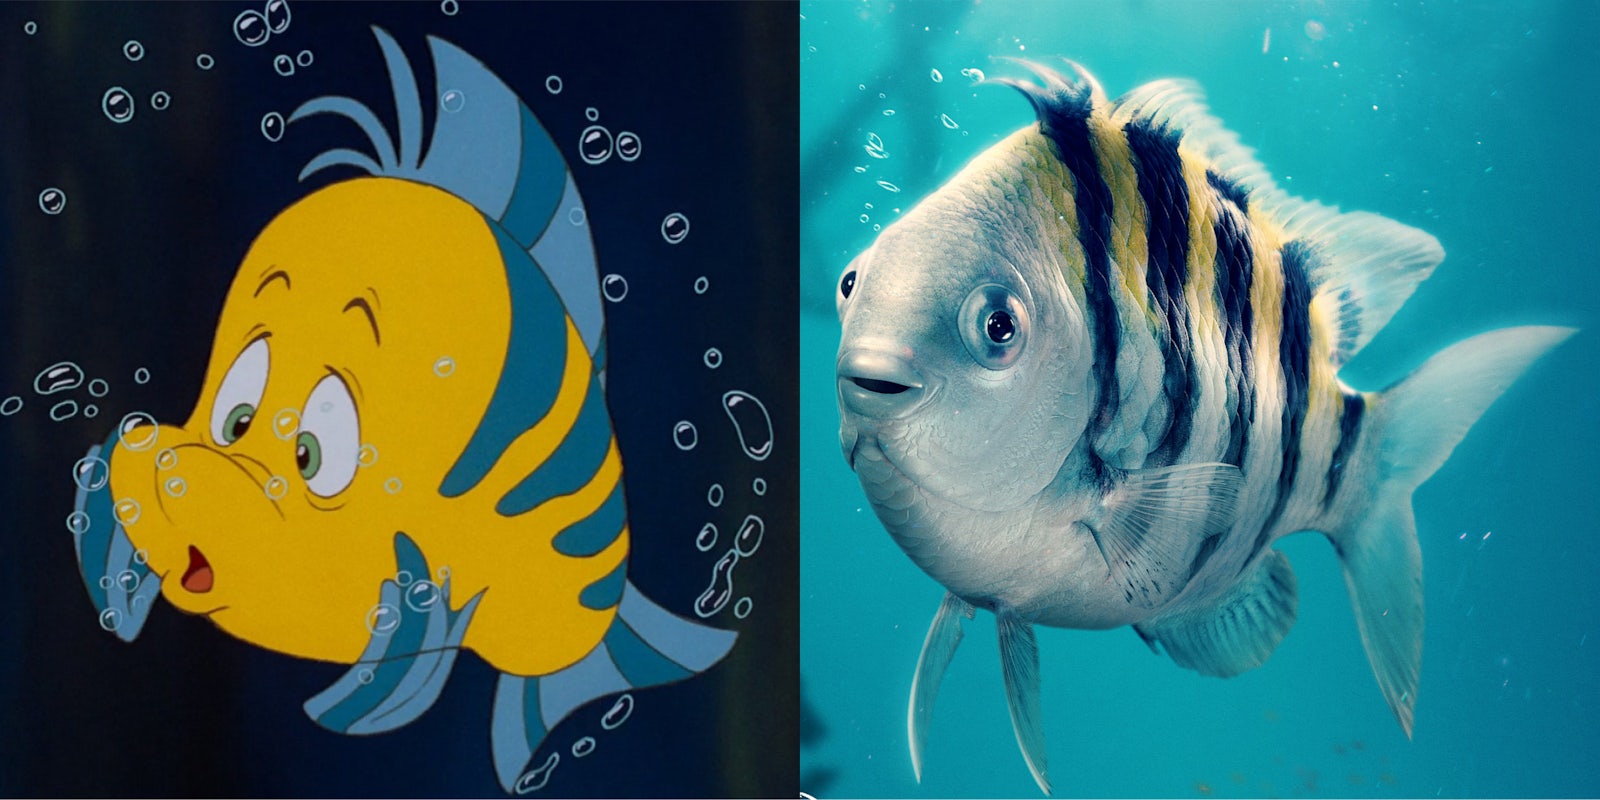 A school of Flounder memes emerge from 'The Little Mermaid' character  posters